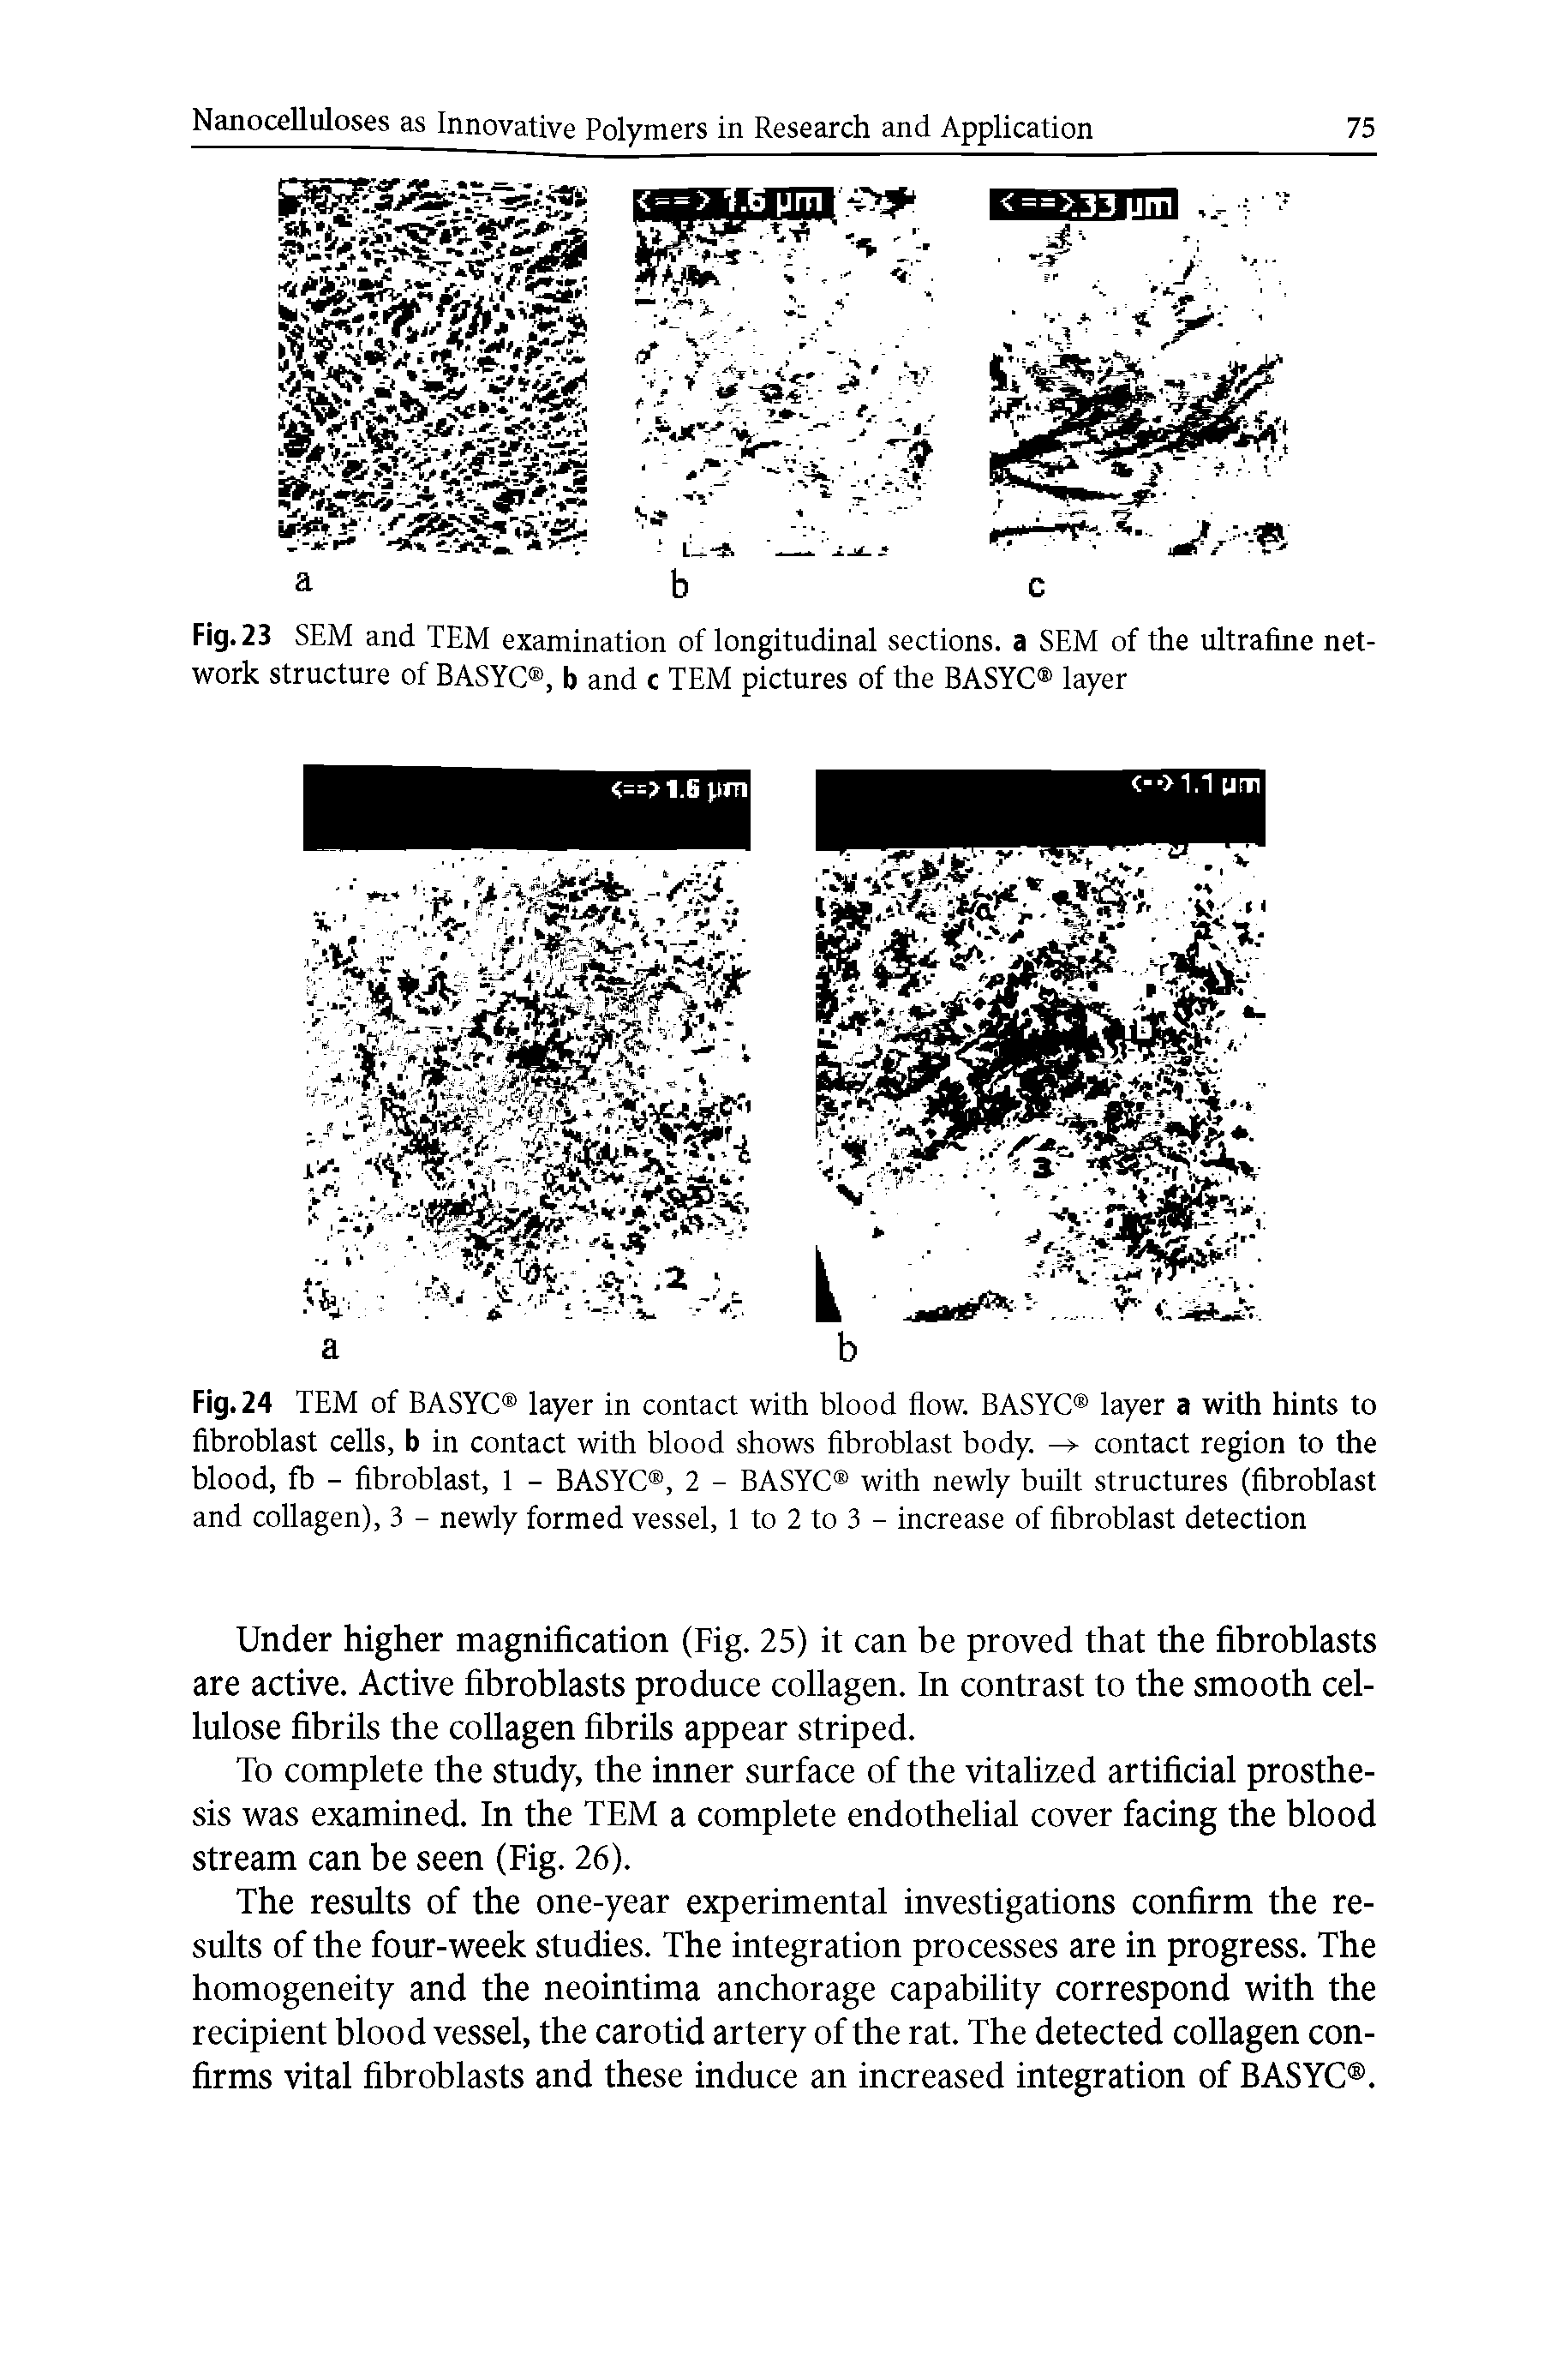 Fig. 23 SEM and TEM examination of longitudinal sections, a SEM of the ultrafine network structure of BASYC , b and c TEM pictures of the BASYC layer...